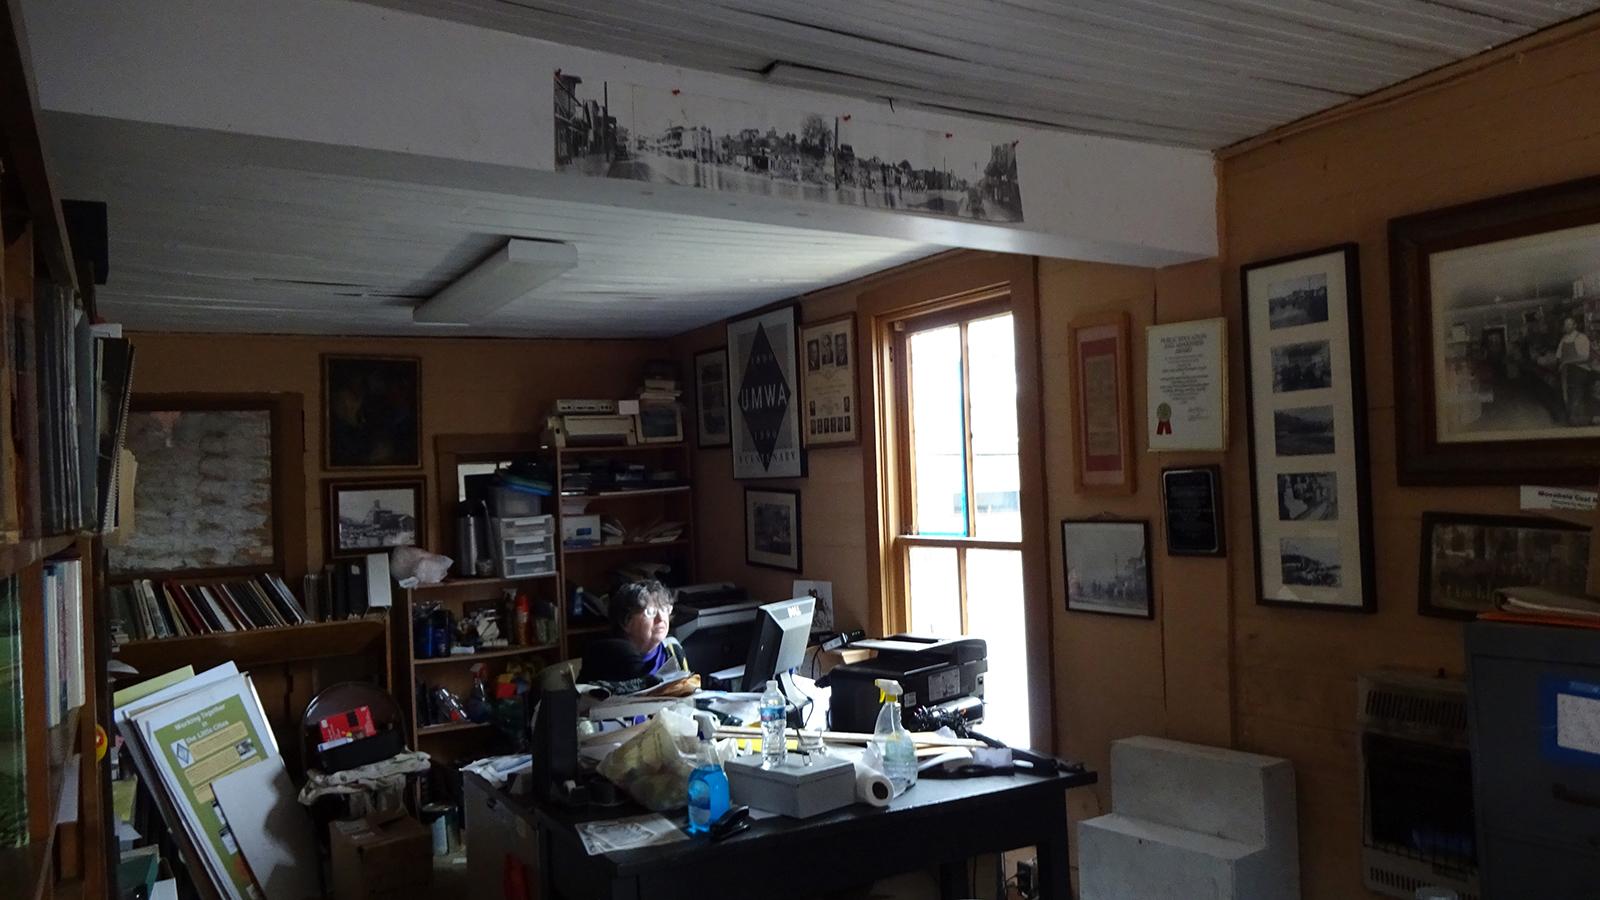 Cheryl Blosser pictured at her desk in the Little Cities of Black Diamonds Council Office